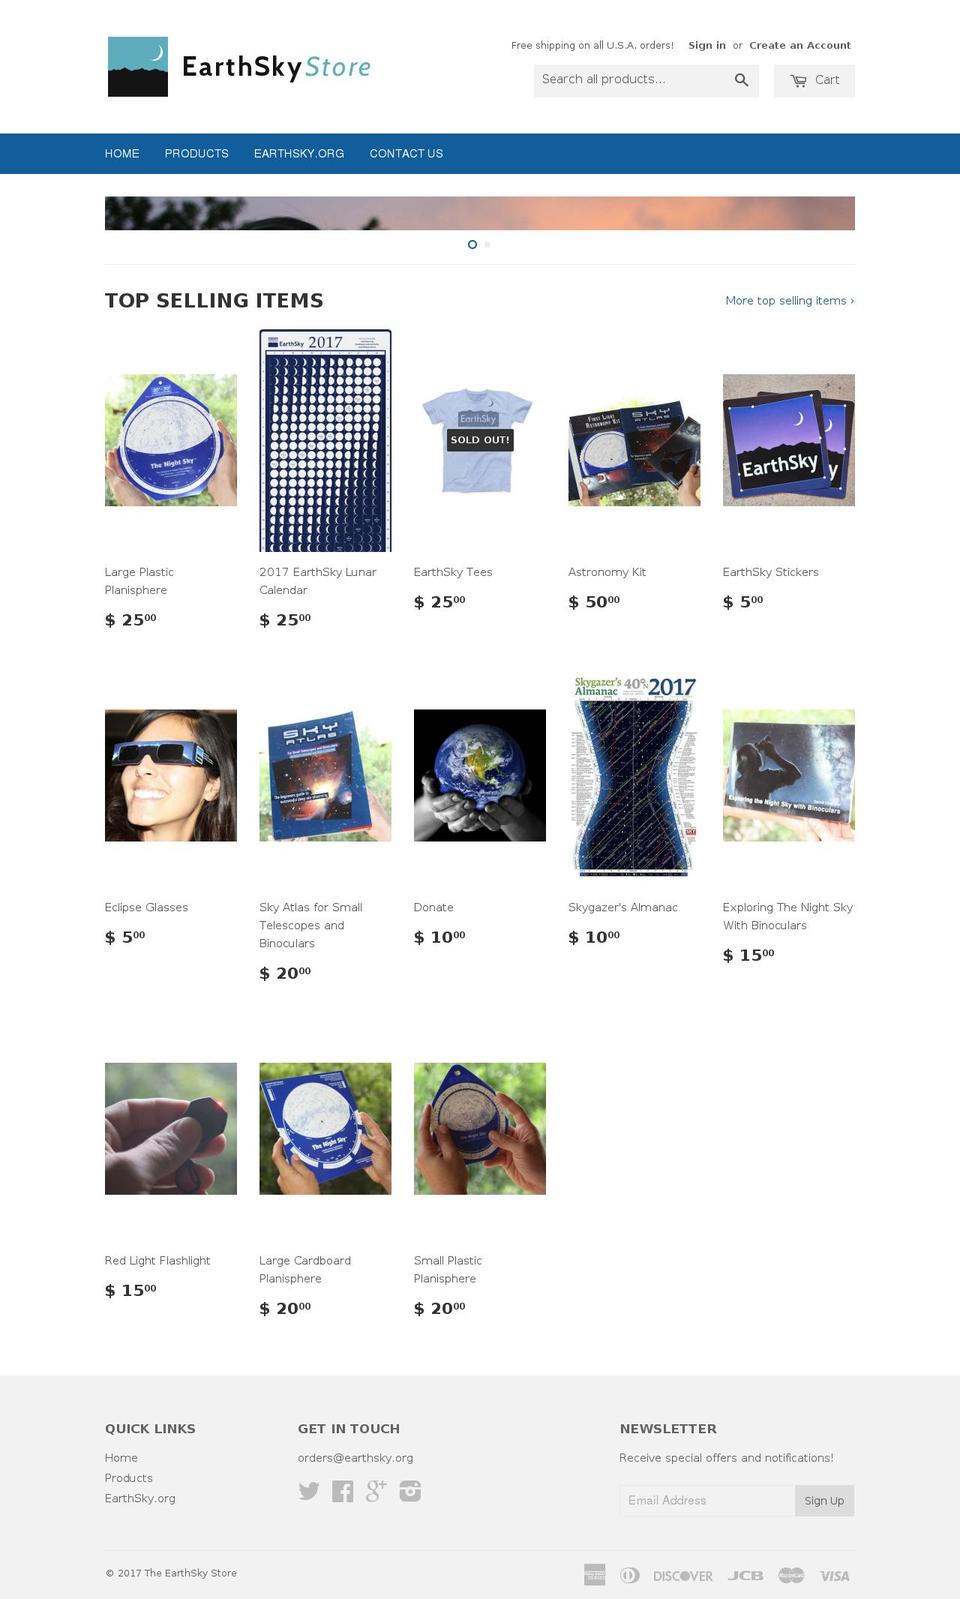 Motion Shopify theme site example earthskystore.org